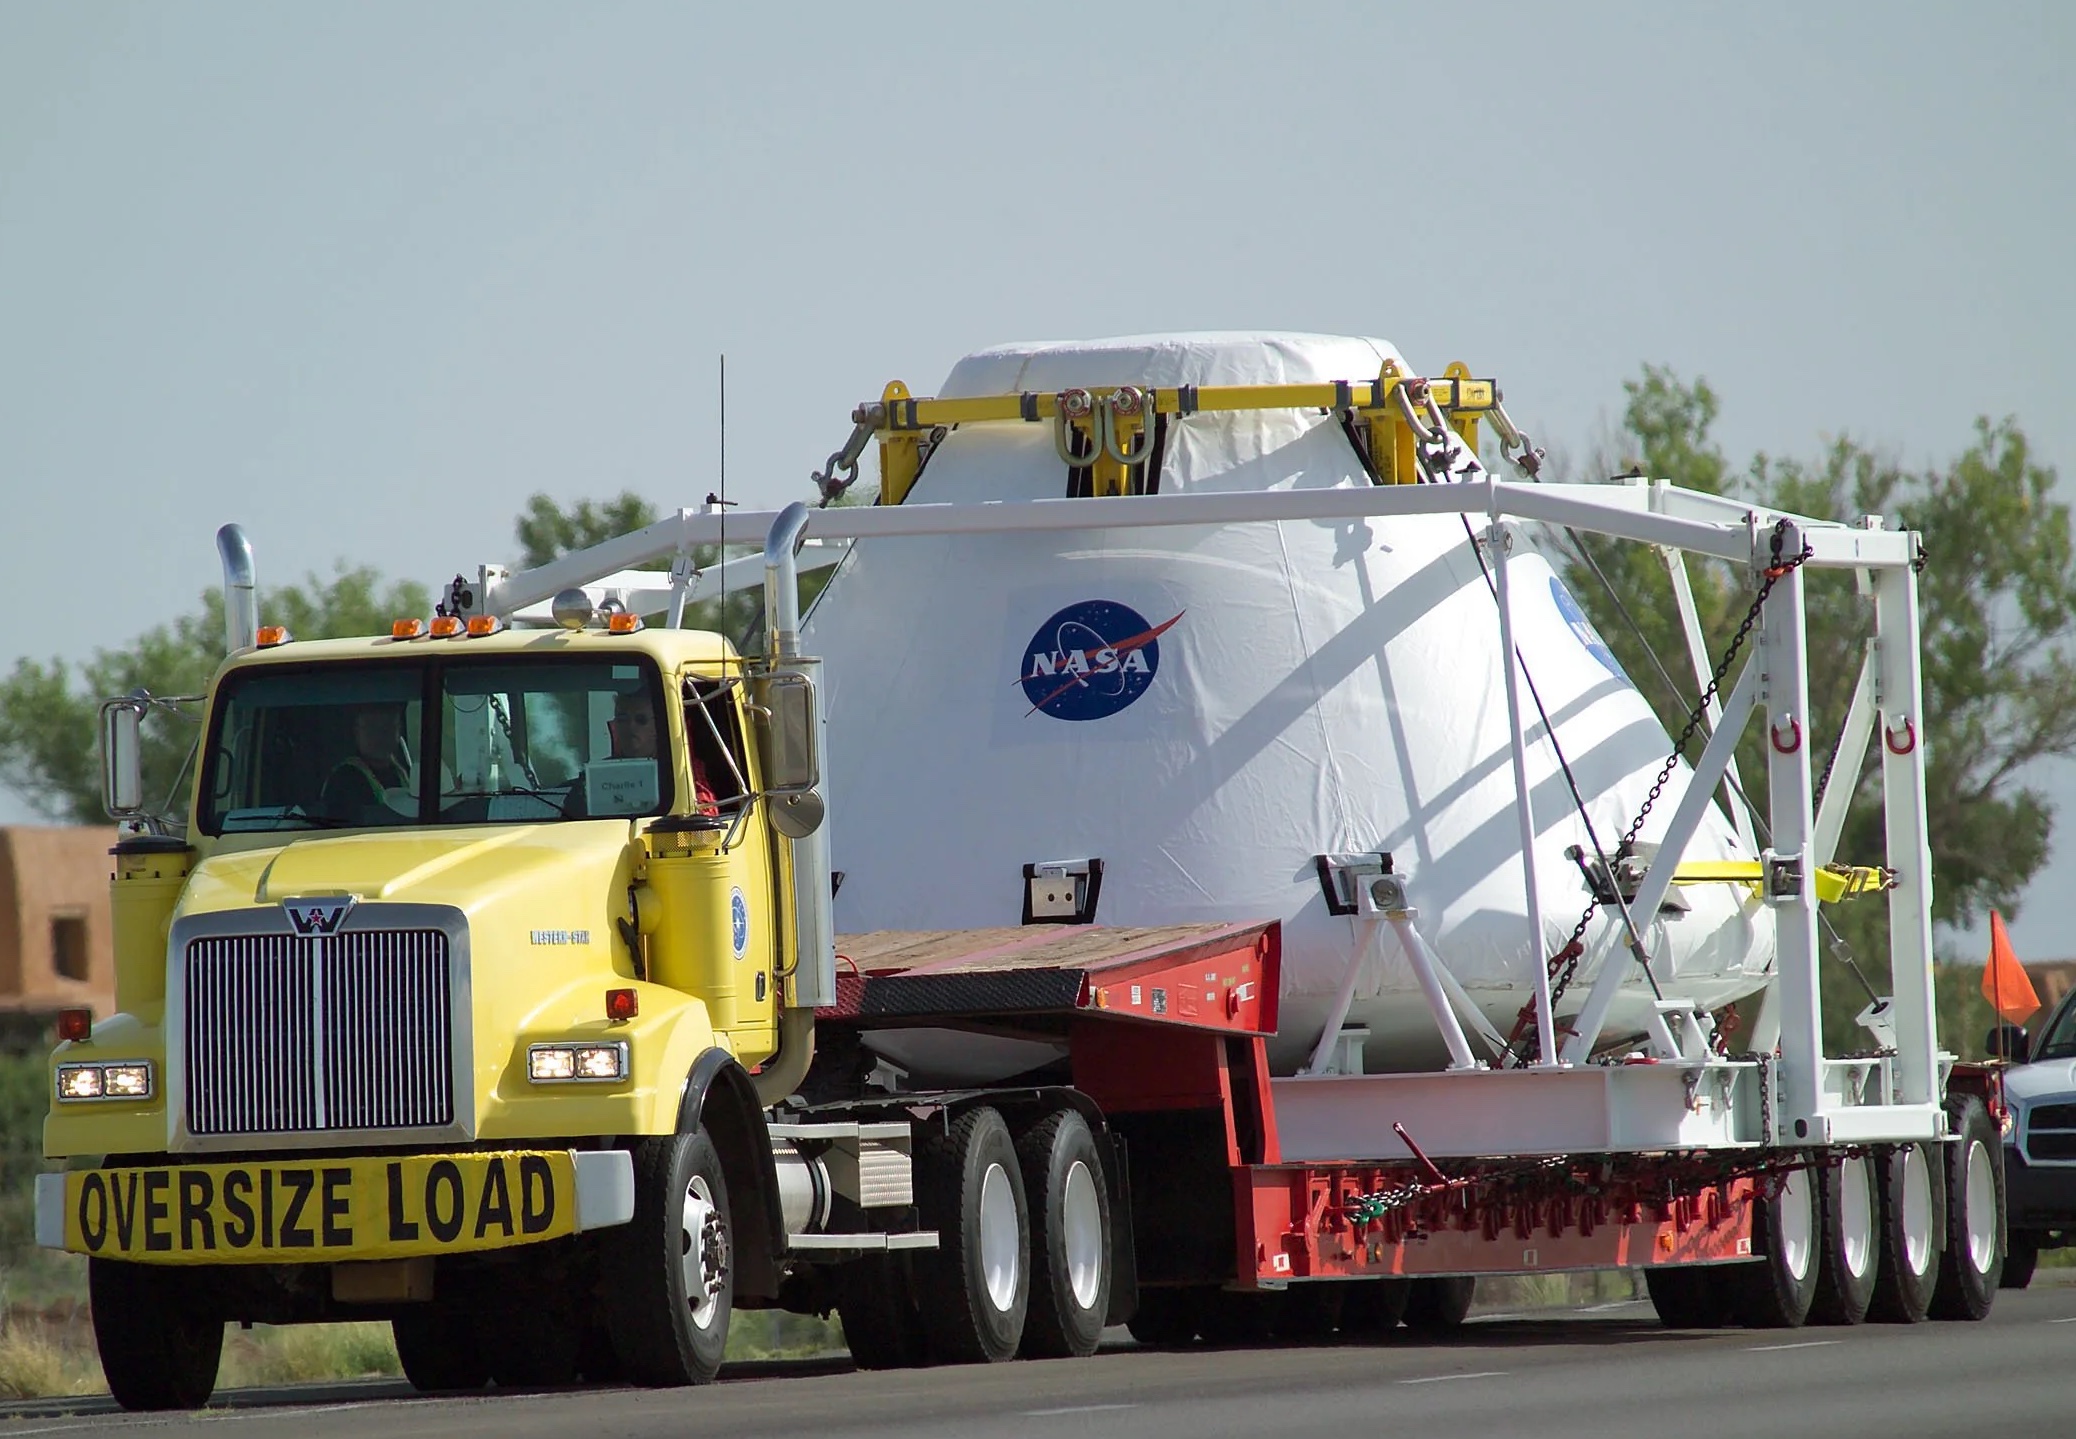 Orion space capsule with OVERSIZE LOAD banner